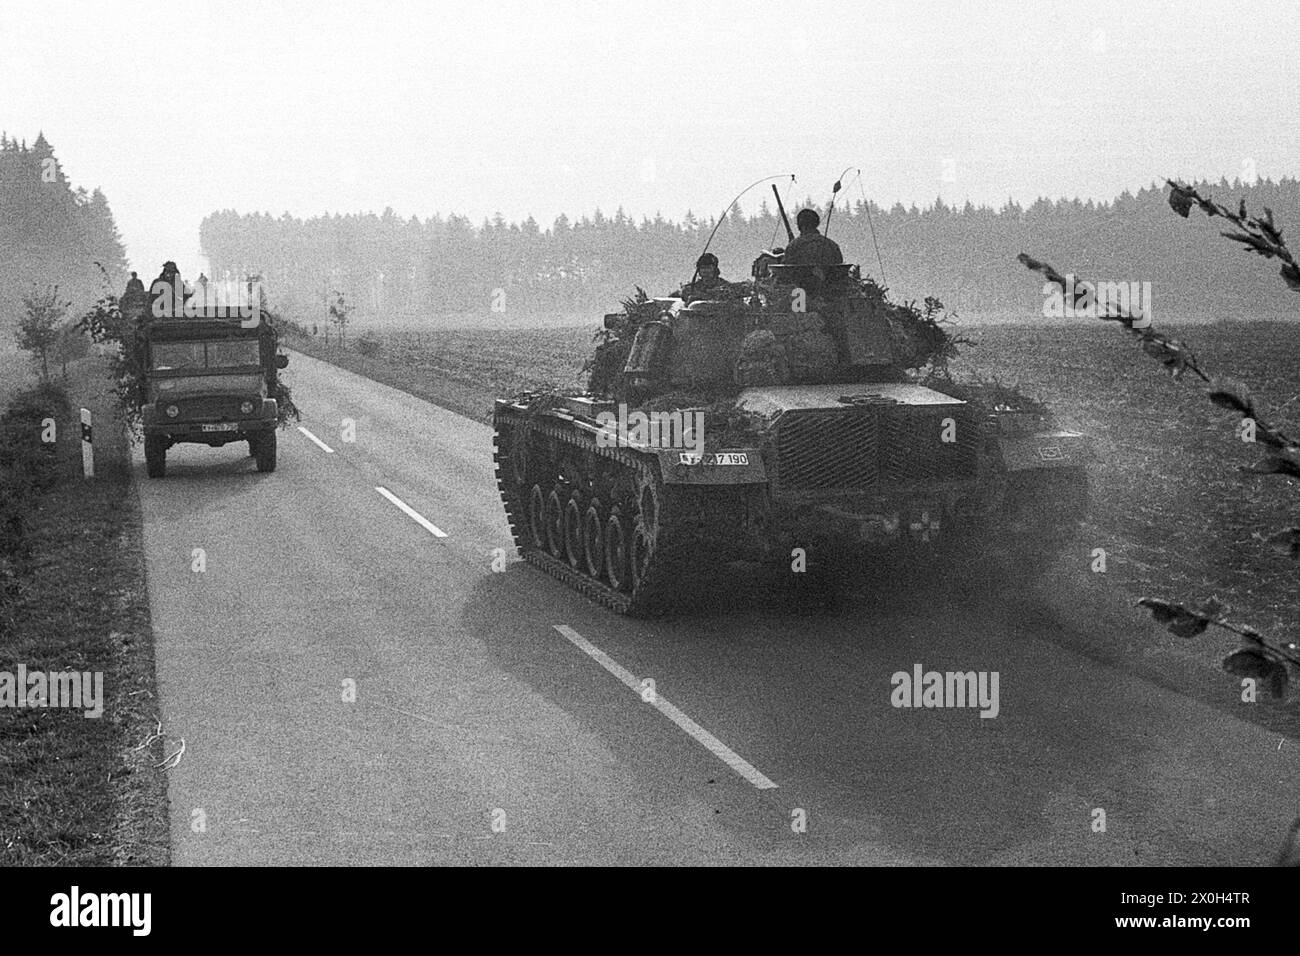 During a combat exercise, an off-road vehicle and a tank meet on a country road. [automated translation] Stock Photo